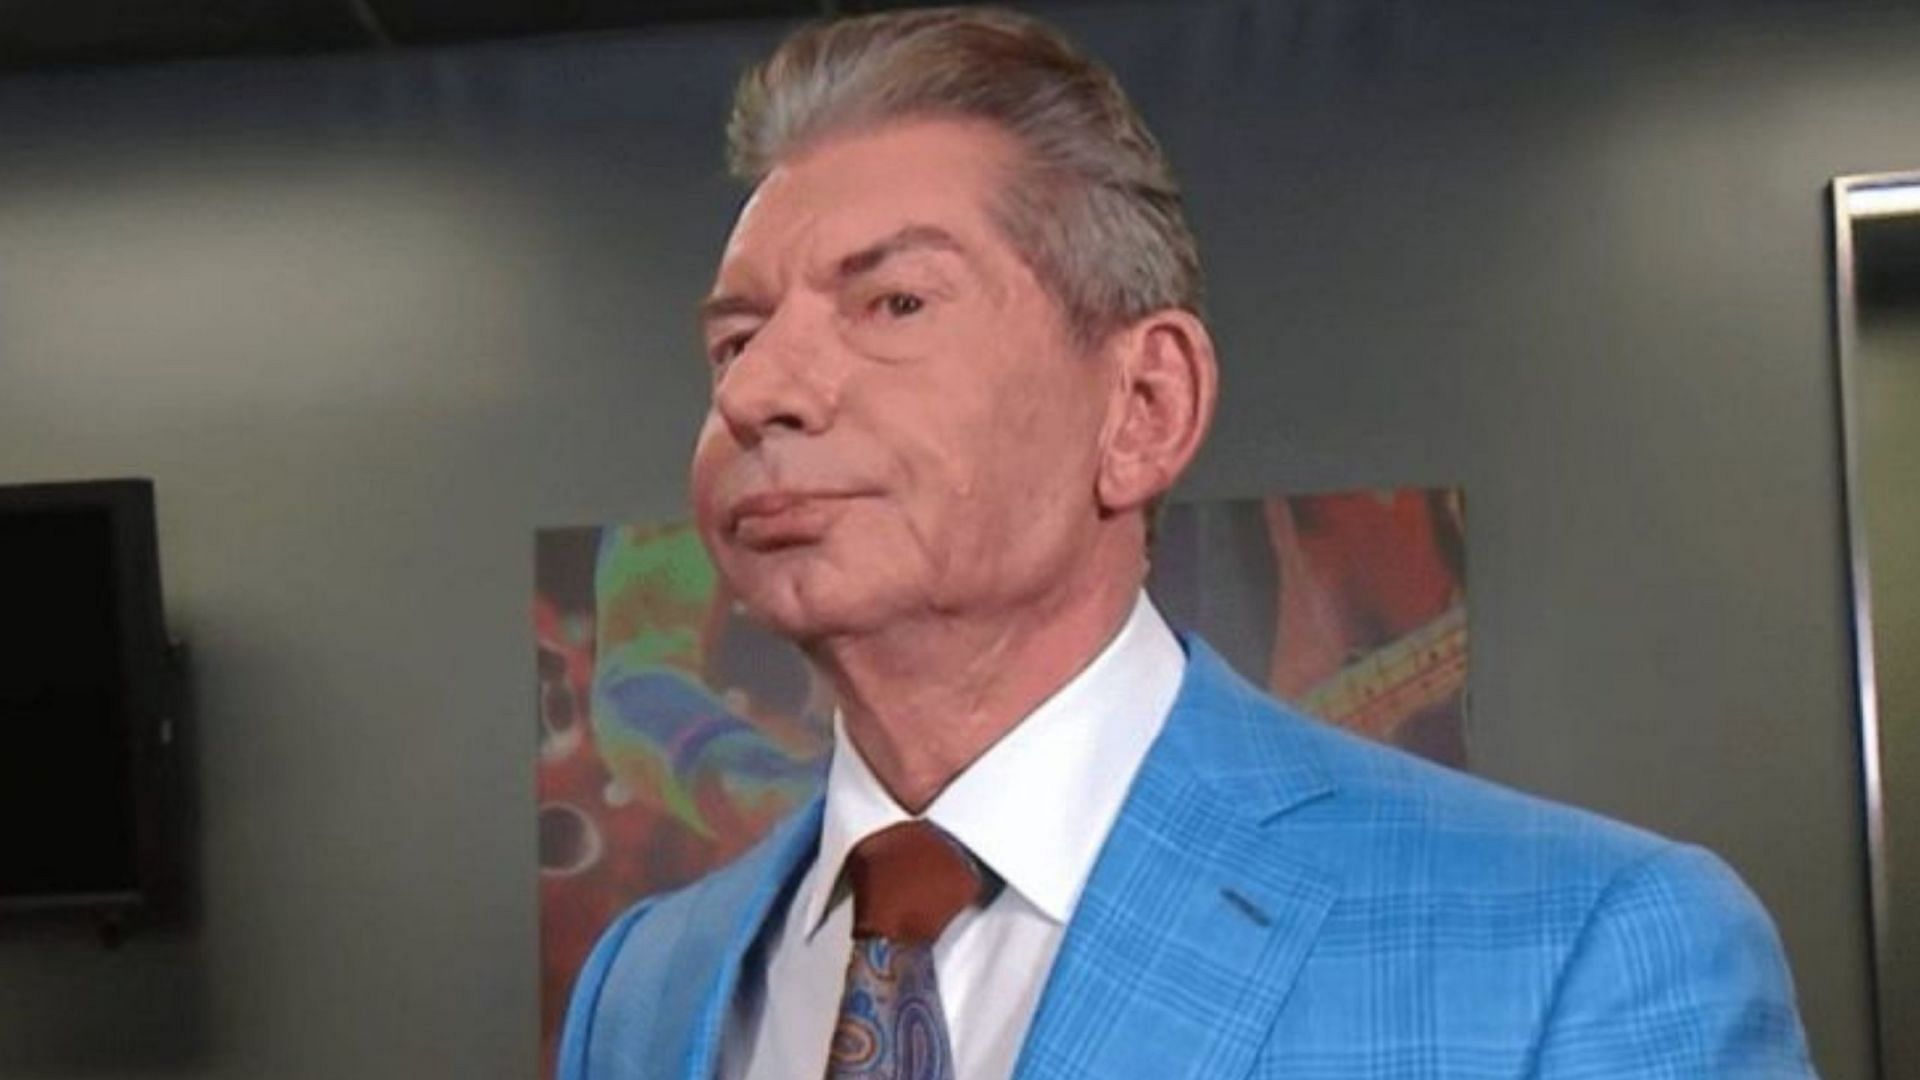 Vince McMahon recently announced his retirement from the company